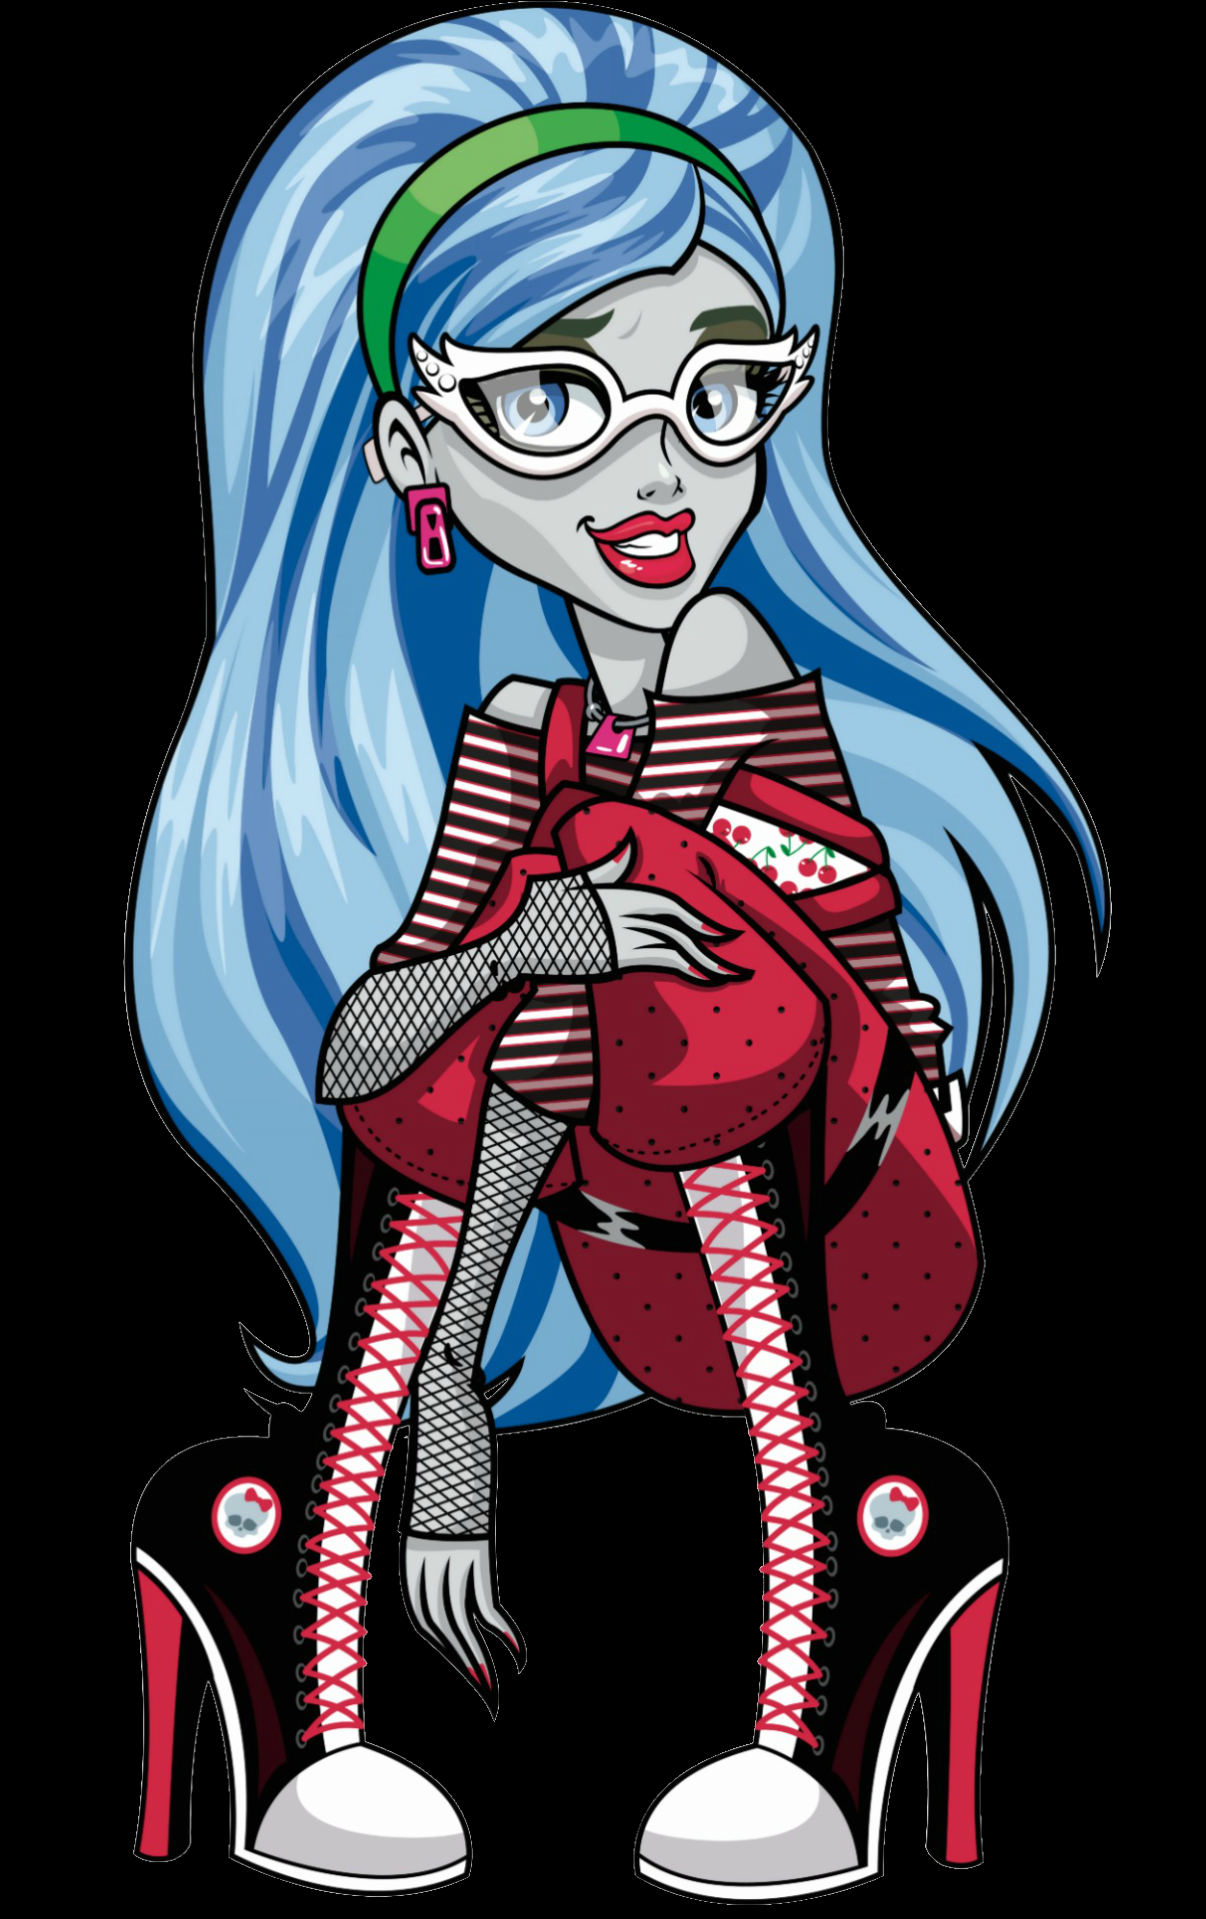 Monster High Ghoulia Yelps Is The Daughter Of A